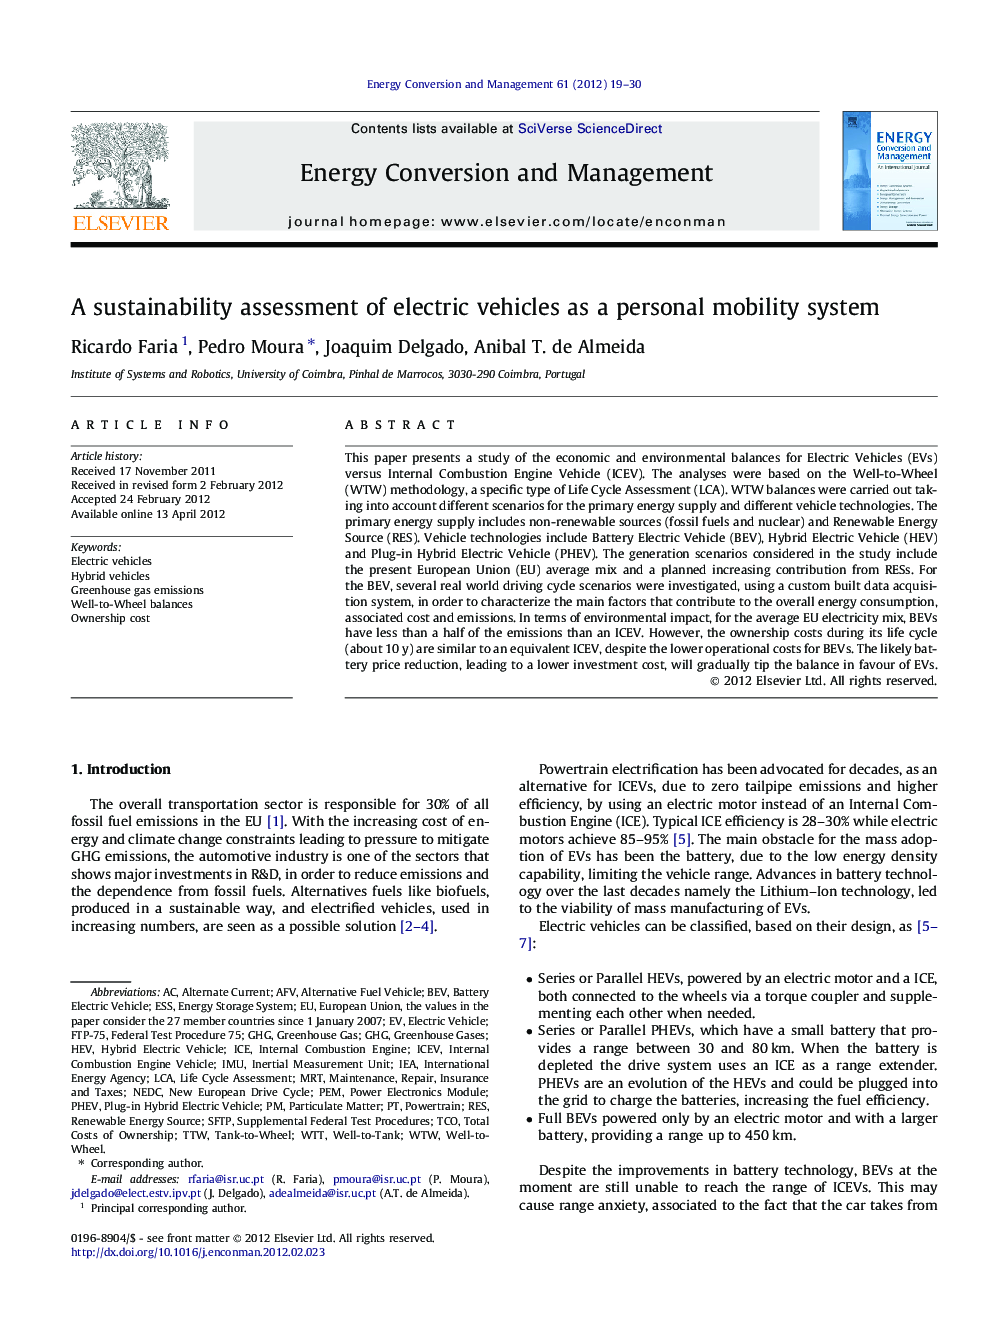 A sustainability assessment of electric vehicles as a personal mobility system